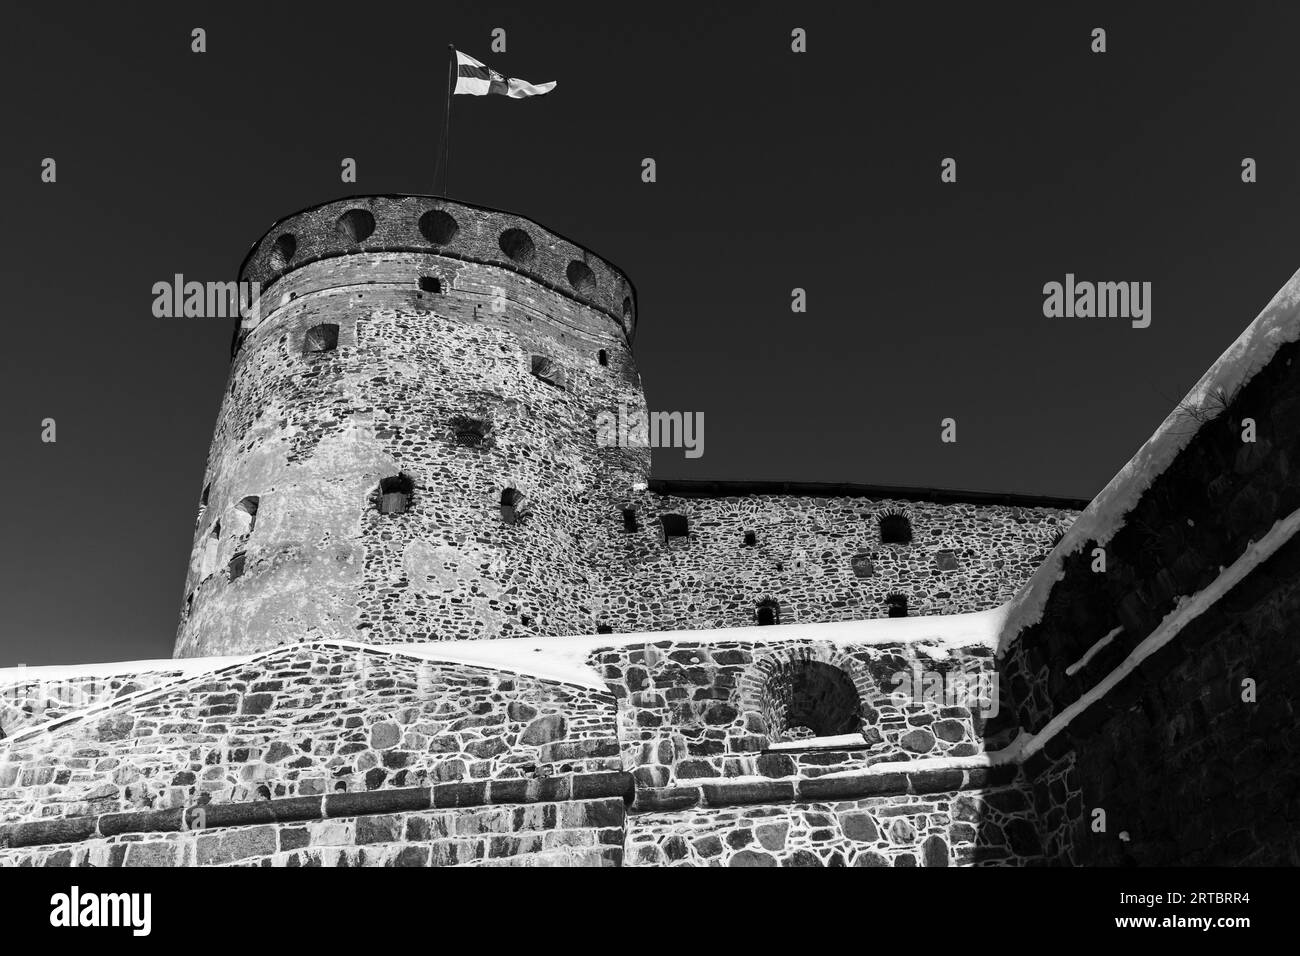 Round tower of Olavinlinna is under dark sky, black and white photo. It is a 15th-century three-tower castle located in Savonlinna, Finland. The fortr Stock Photo